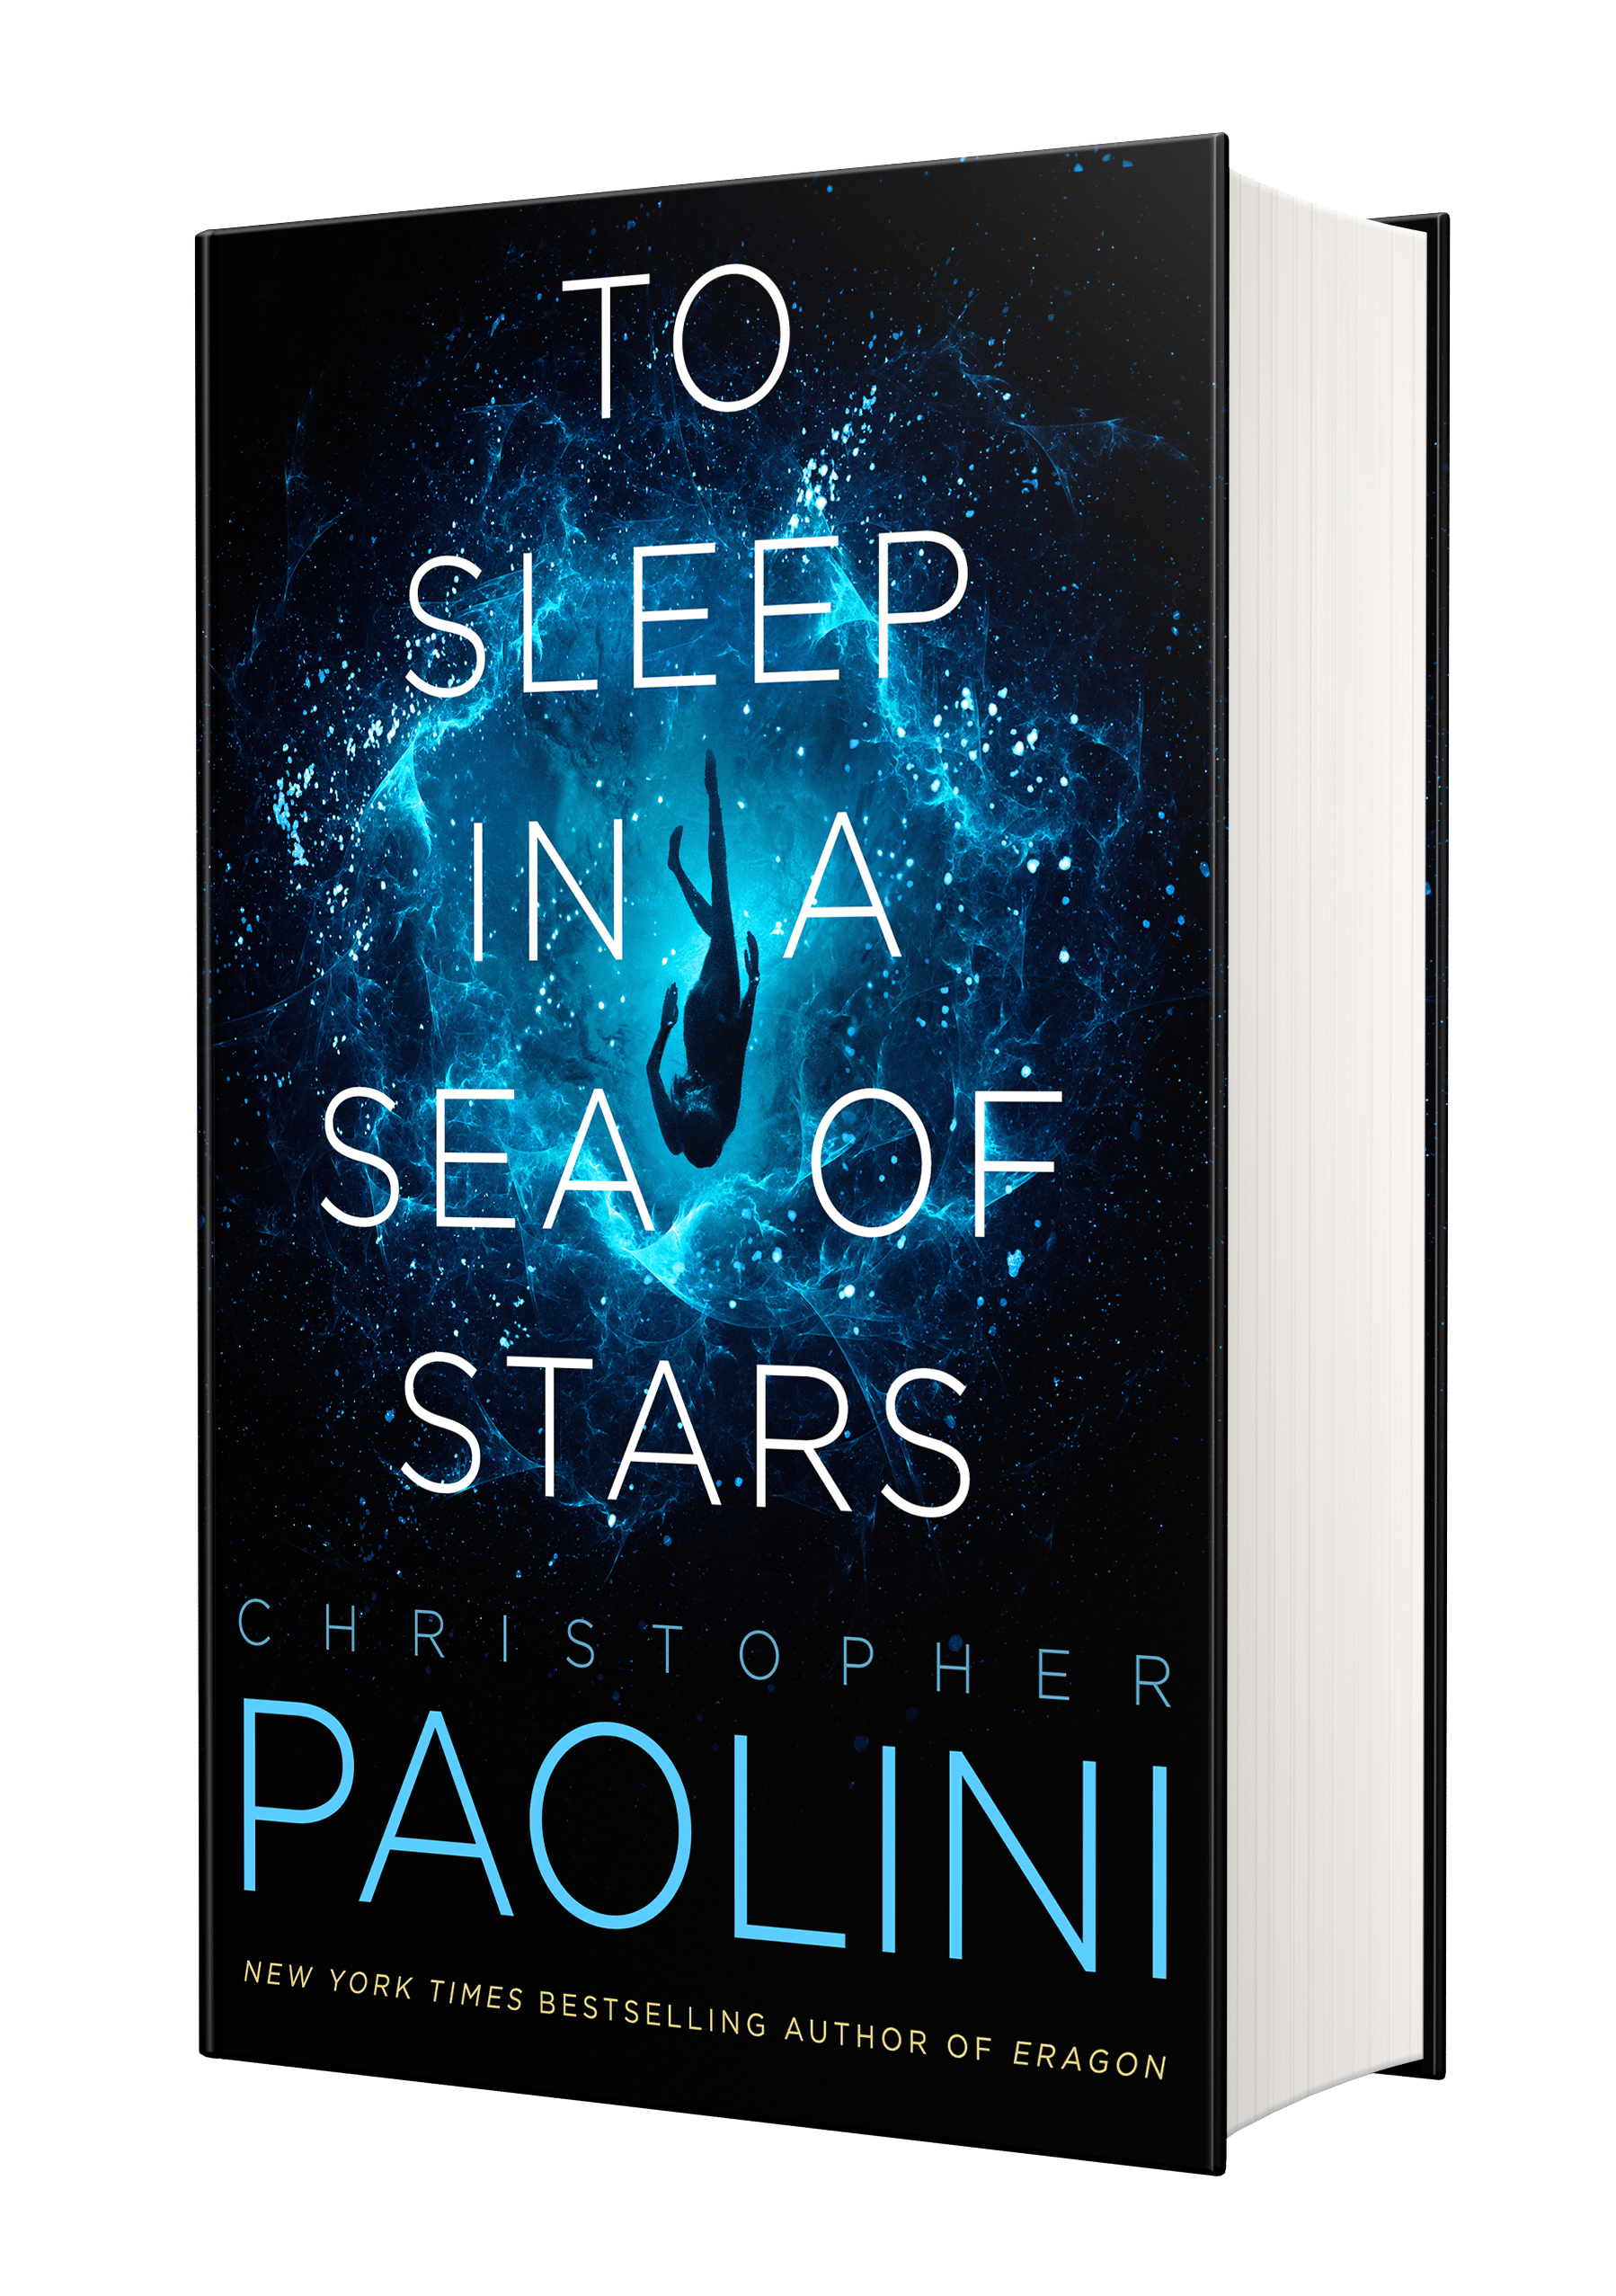 To Sleep in a Sea of Stars Book Cover